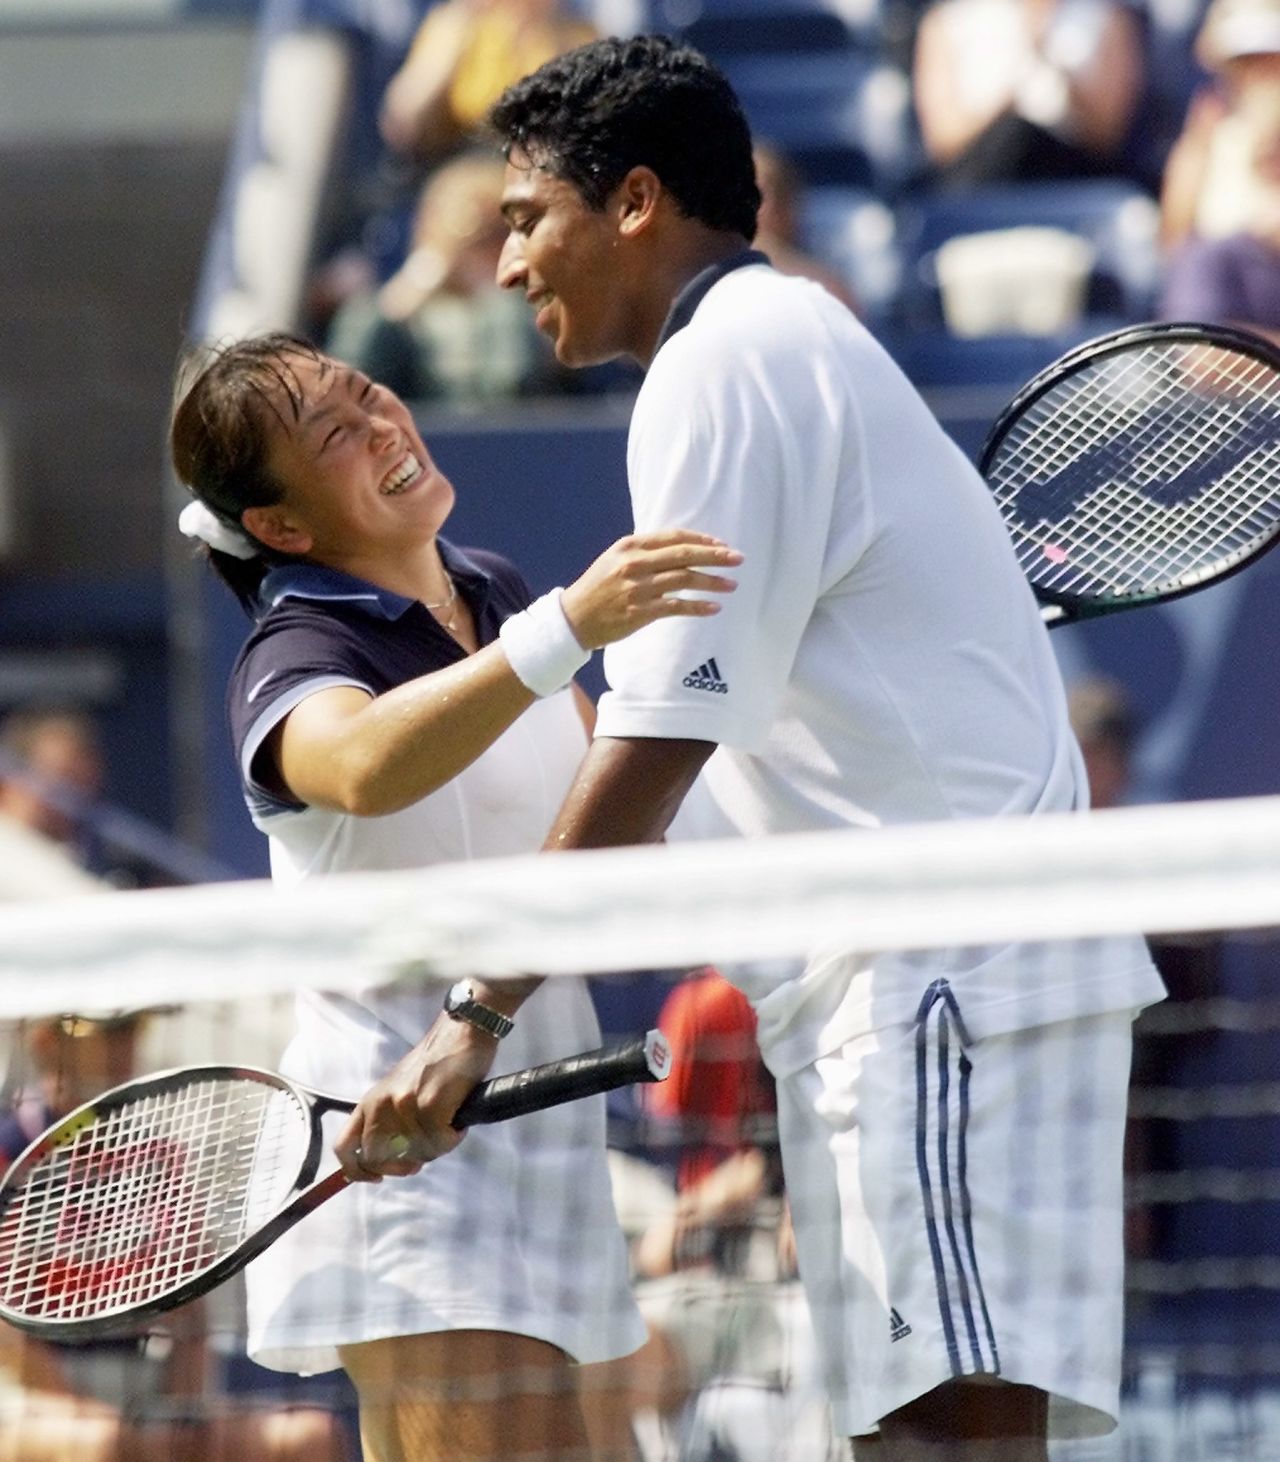 Bhupathi enjoyed grand slam mixed doubles success with another Japanese partner, winning the 1999 U.S. Open crown with Ai Sugiyama, defeating  Americans Kimberly Po and Donald Johnson.